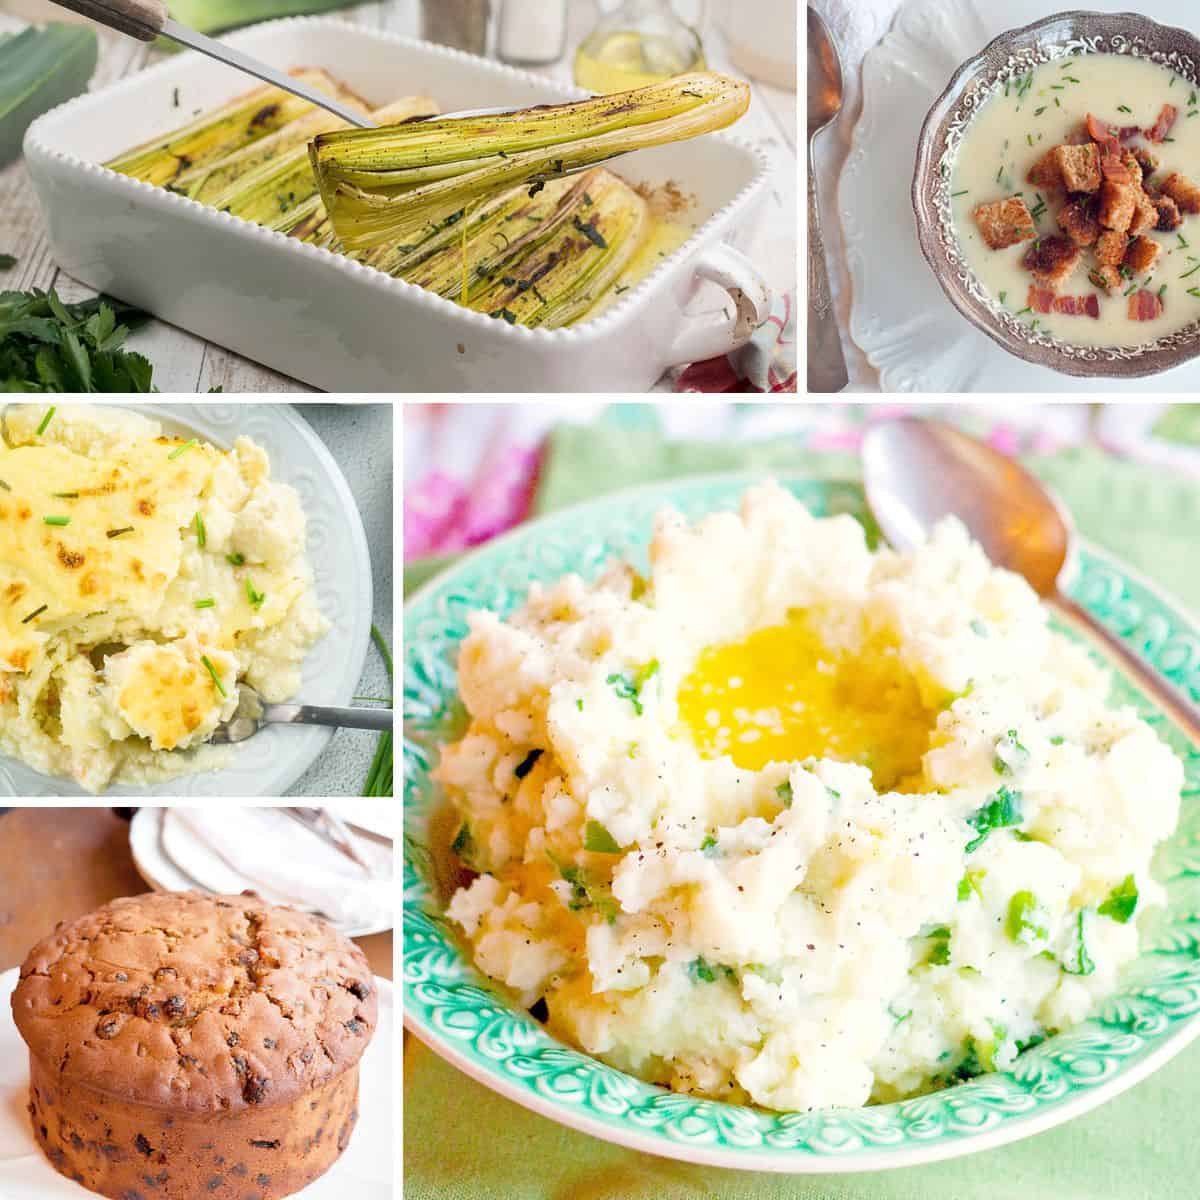 A collage of photos from recipes included in the post.